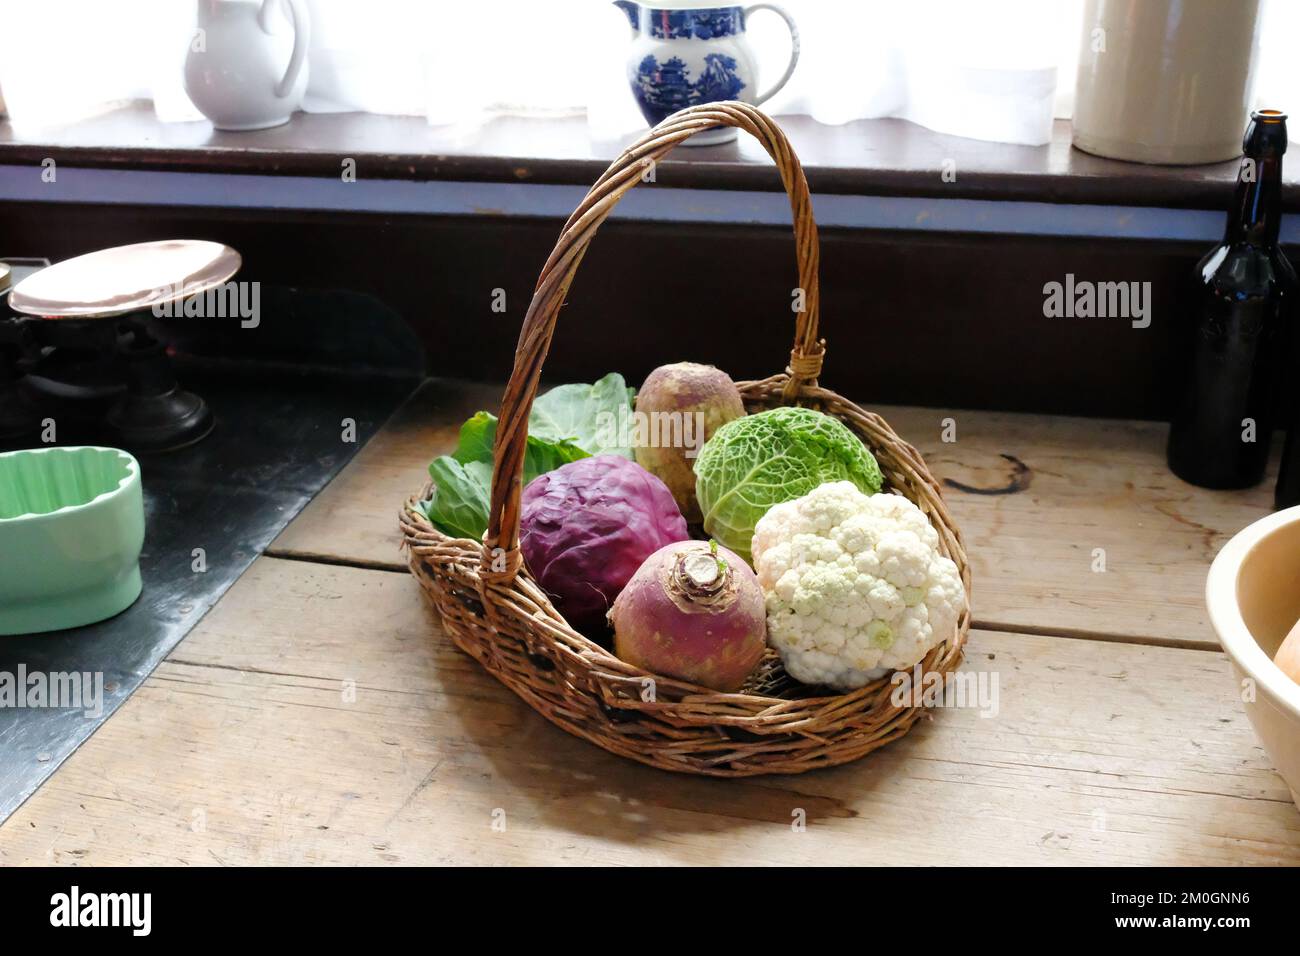 Freshly cut vegetables in a wicker basket on an old fashioned work surface - John Gollop Stock Photo